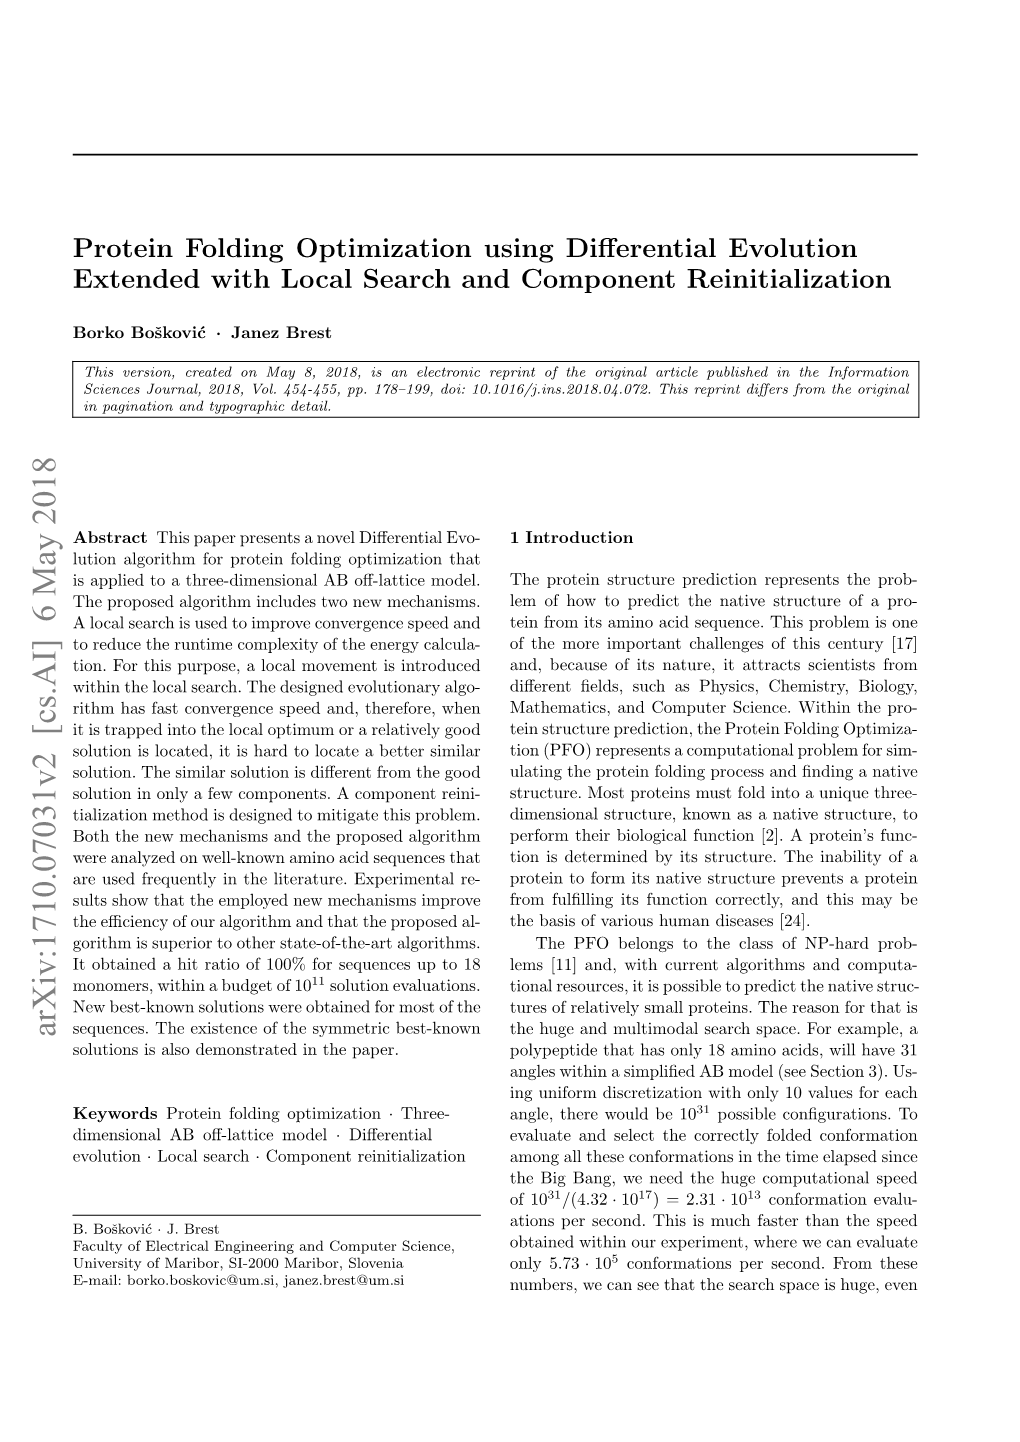 Protein Folding Optimization Using Differential Evolution